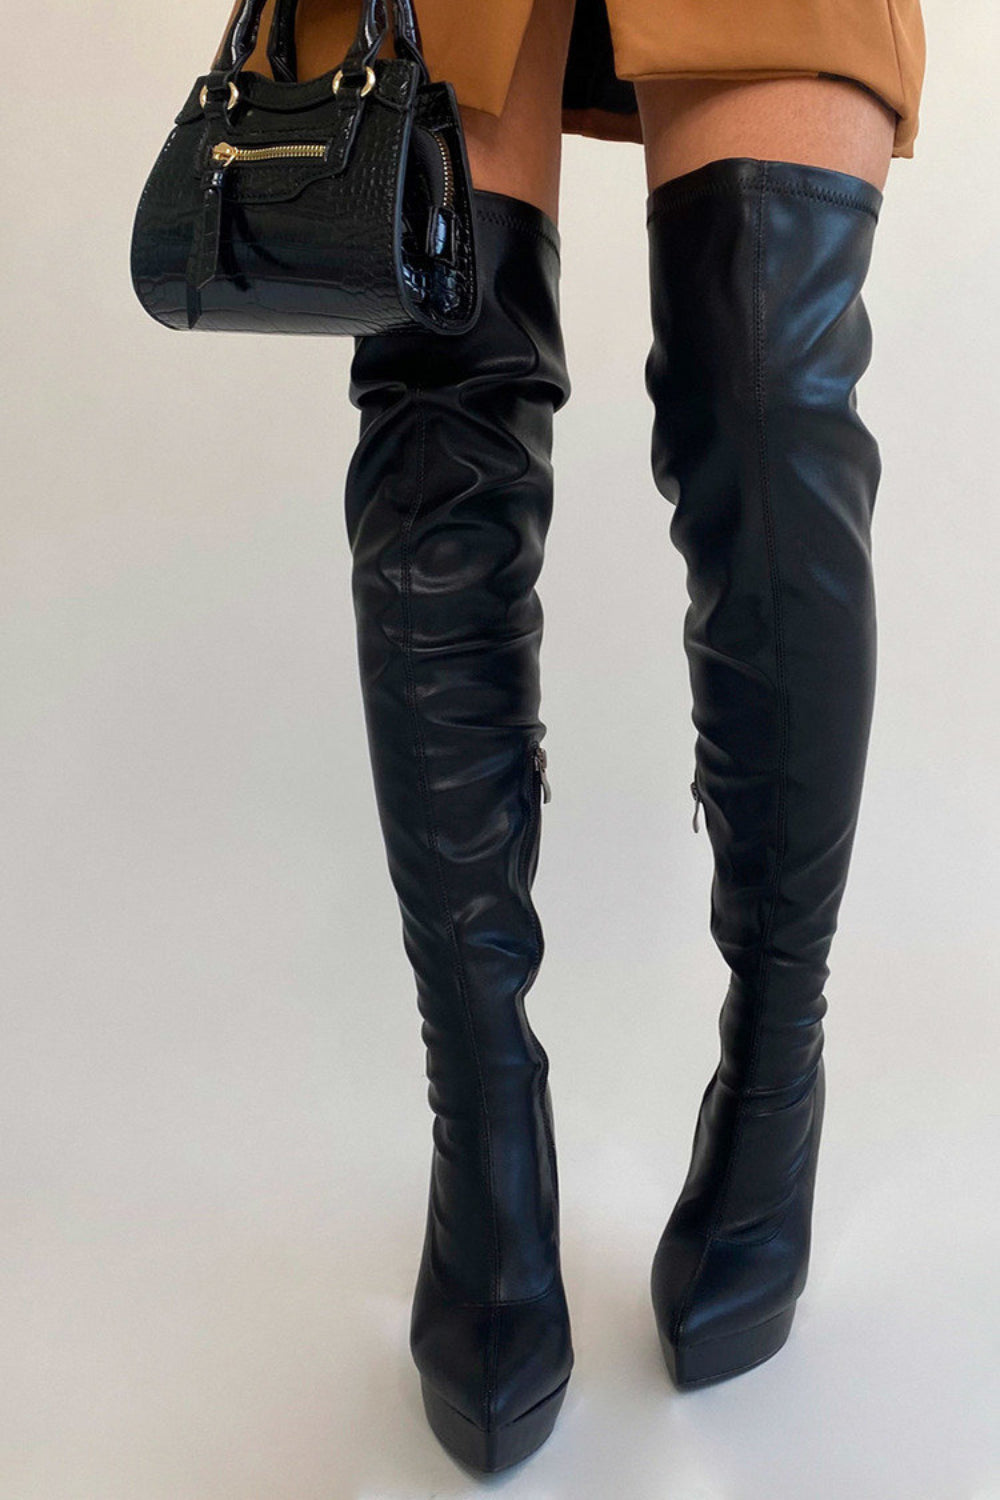 Black PU Pointed Toe Calf High Heel Boots With Side Zip